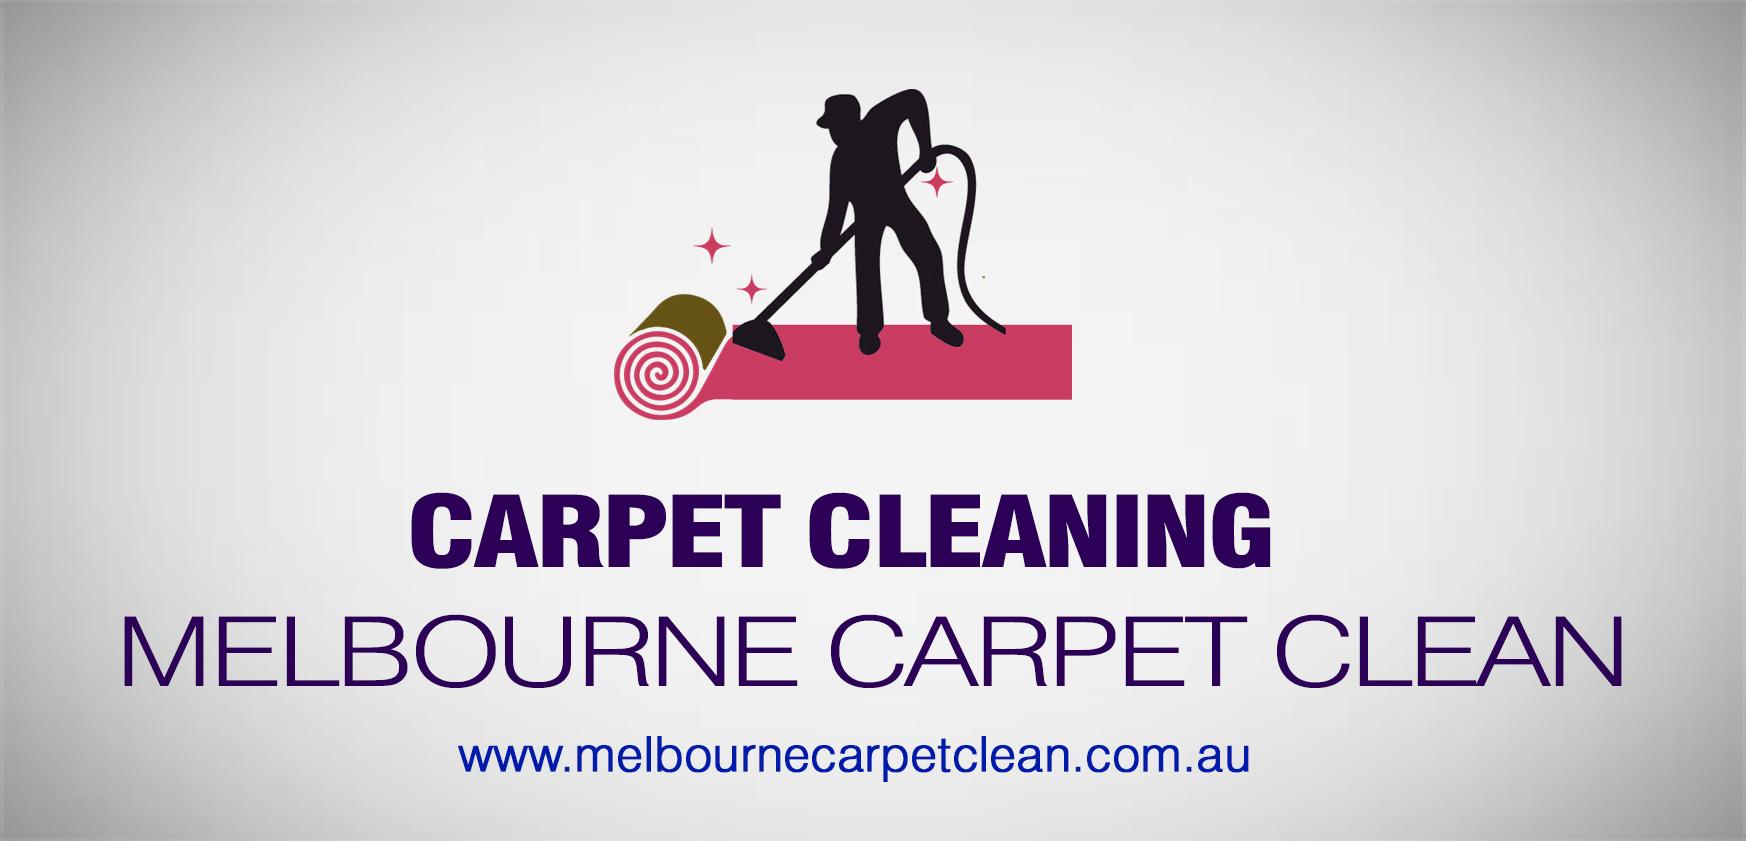 Steam cleaning melbourne